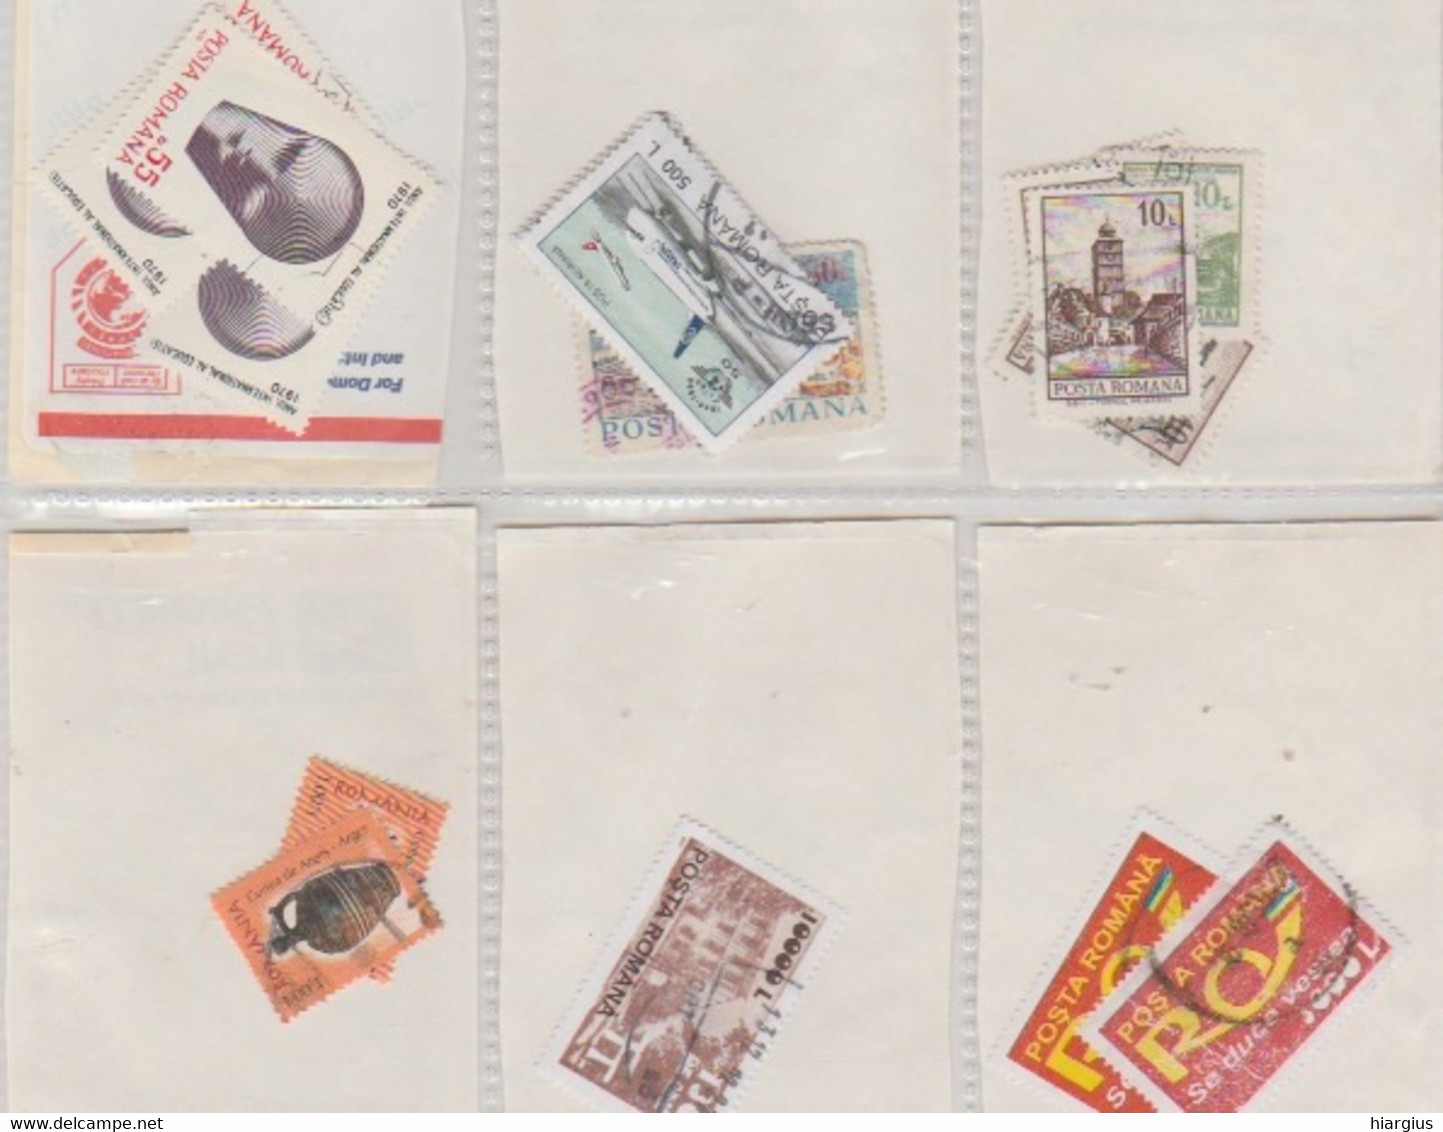 WORLDWIDE Assortment of  2449  unused and used stamps.